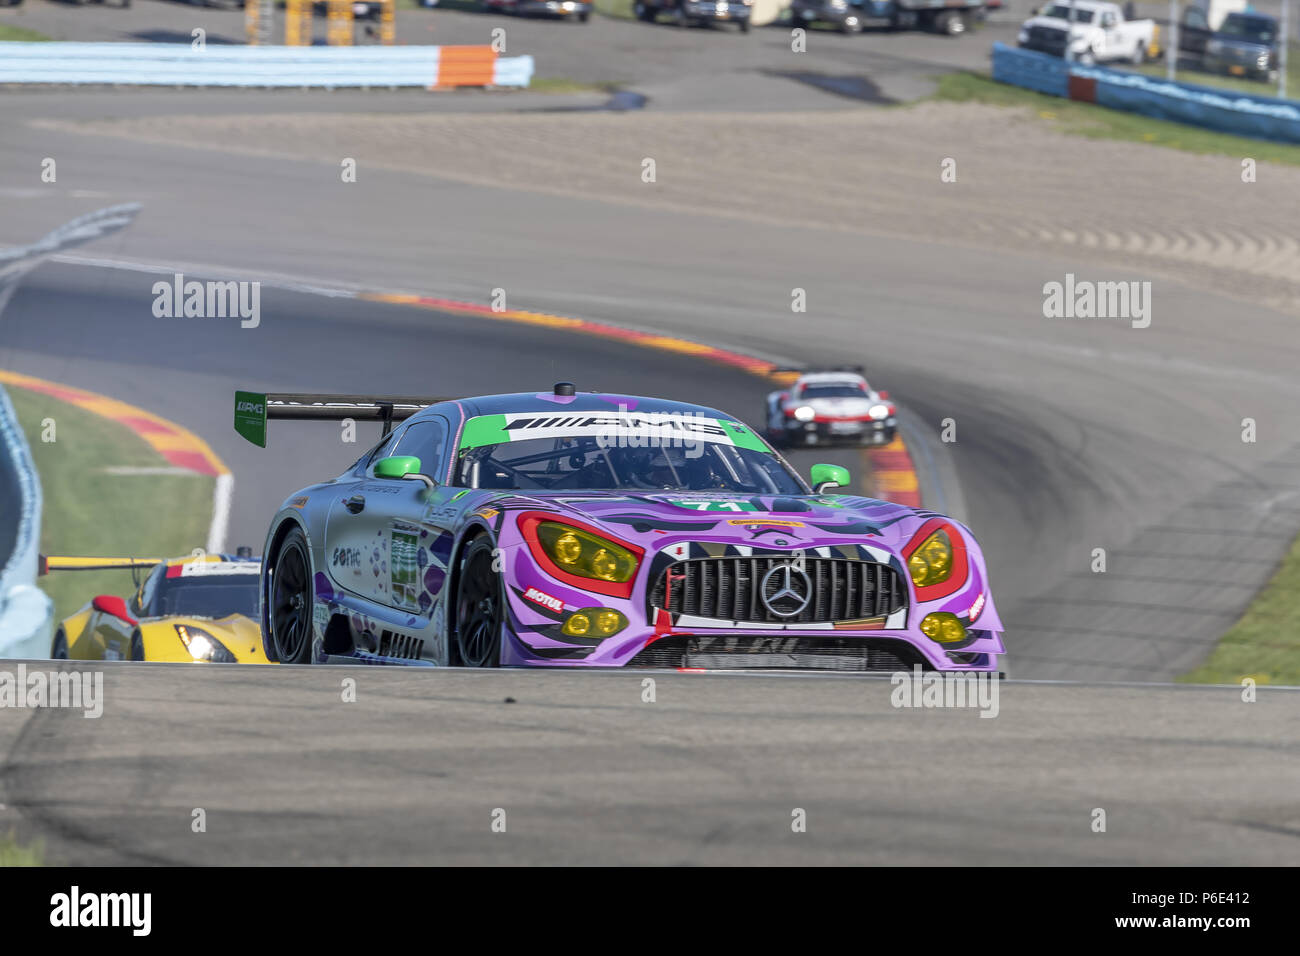 Watkins Glen, New York, USA. 30th June, 2018. The P1 Motorsports/Sonic Tools Mercedes-AMG GT3 America car practice for the Sahlen's Six Hours At The Glen at Watkins Glen International Raceway in Watkins Glen, New York. Credit: Walter G Arce Sr Asp Inc/ASP/ZUMA Wire/Alamy Live News Stock Photo